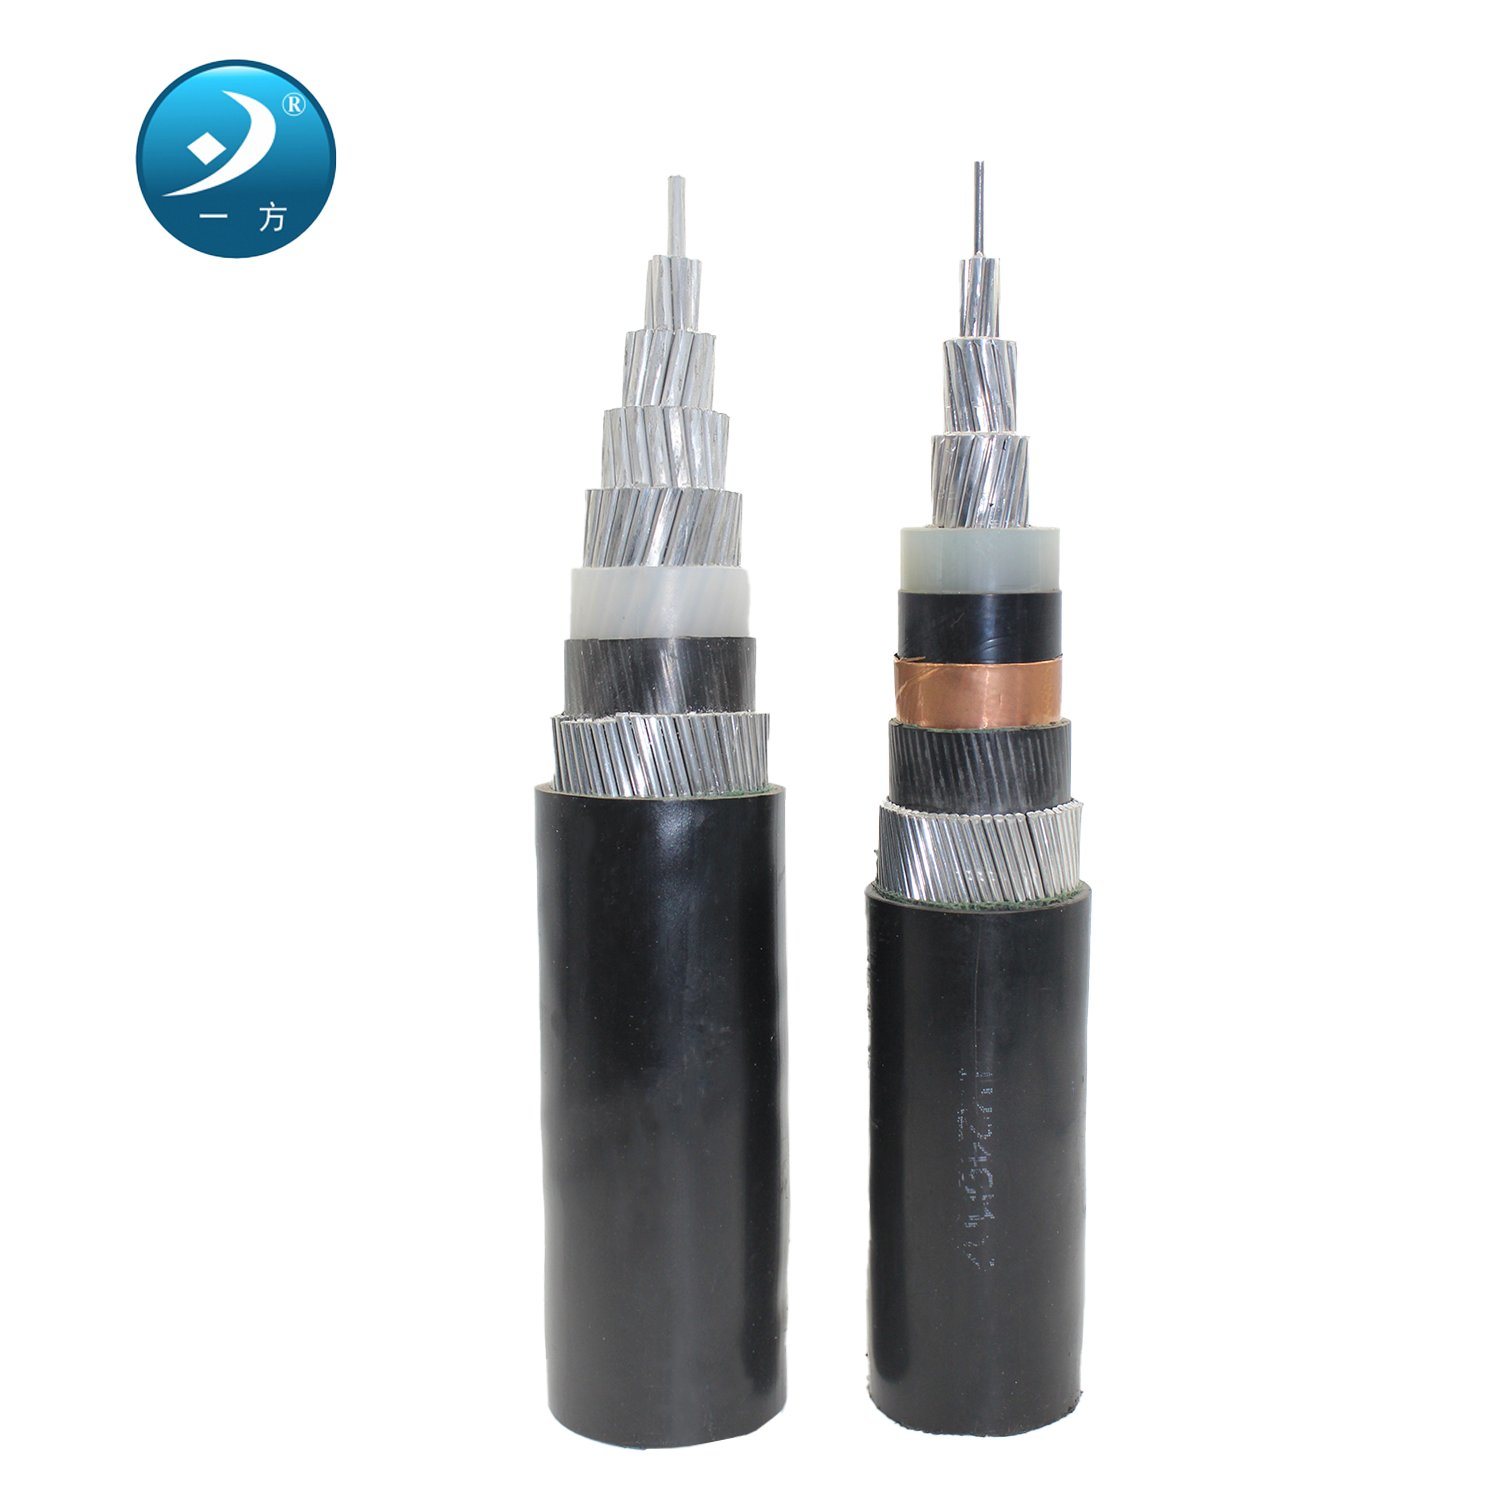 11kv 25mm2 XLPE Insulated Steel Wire Armored Underground Power Cable